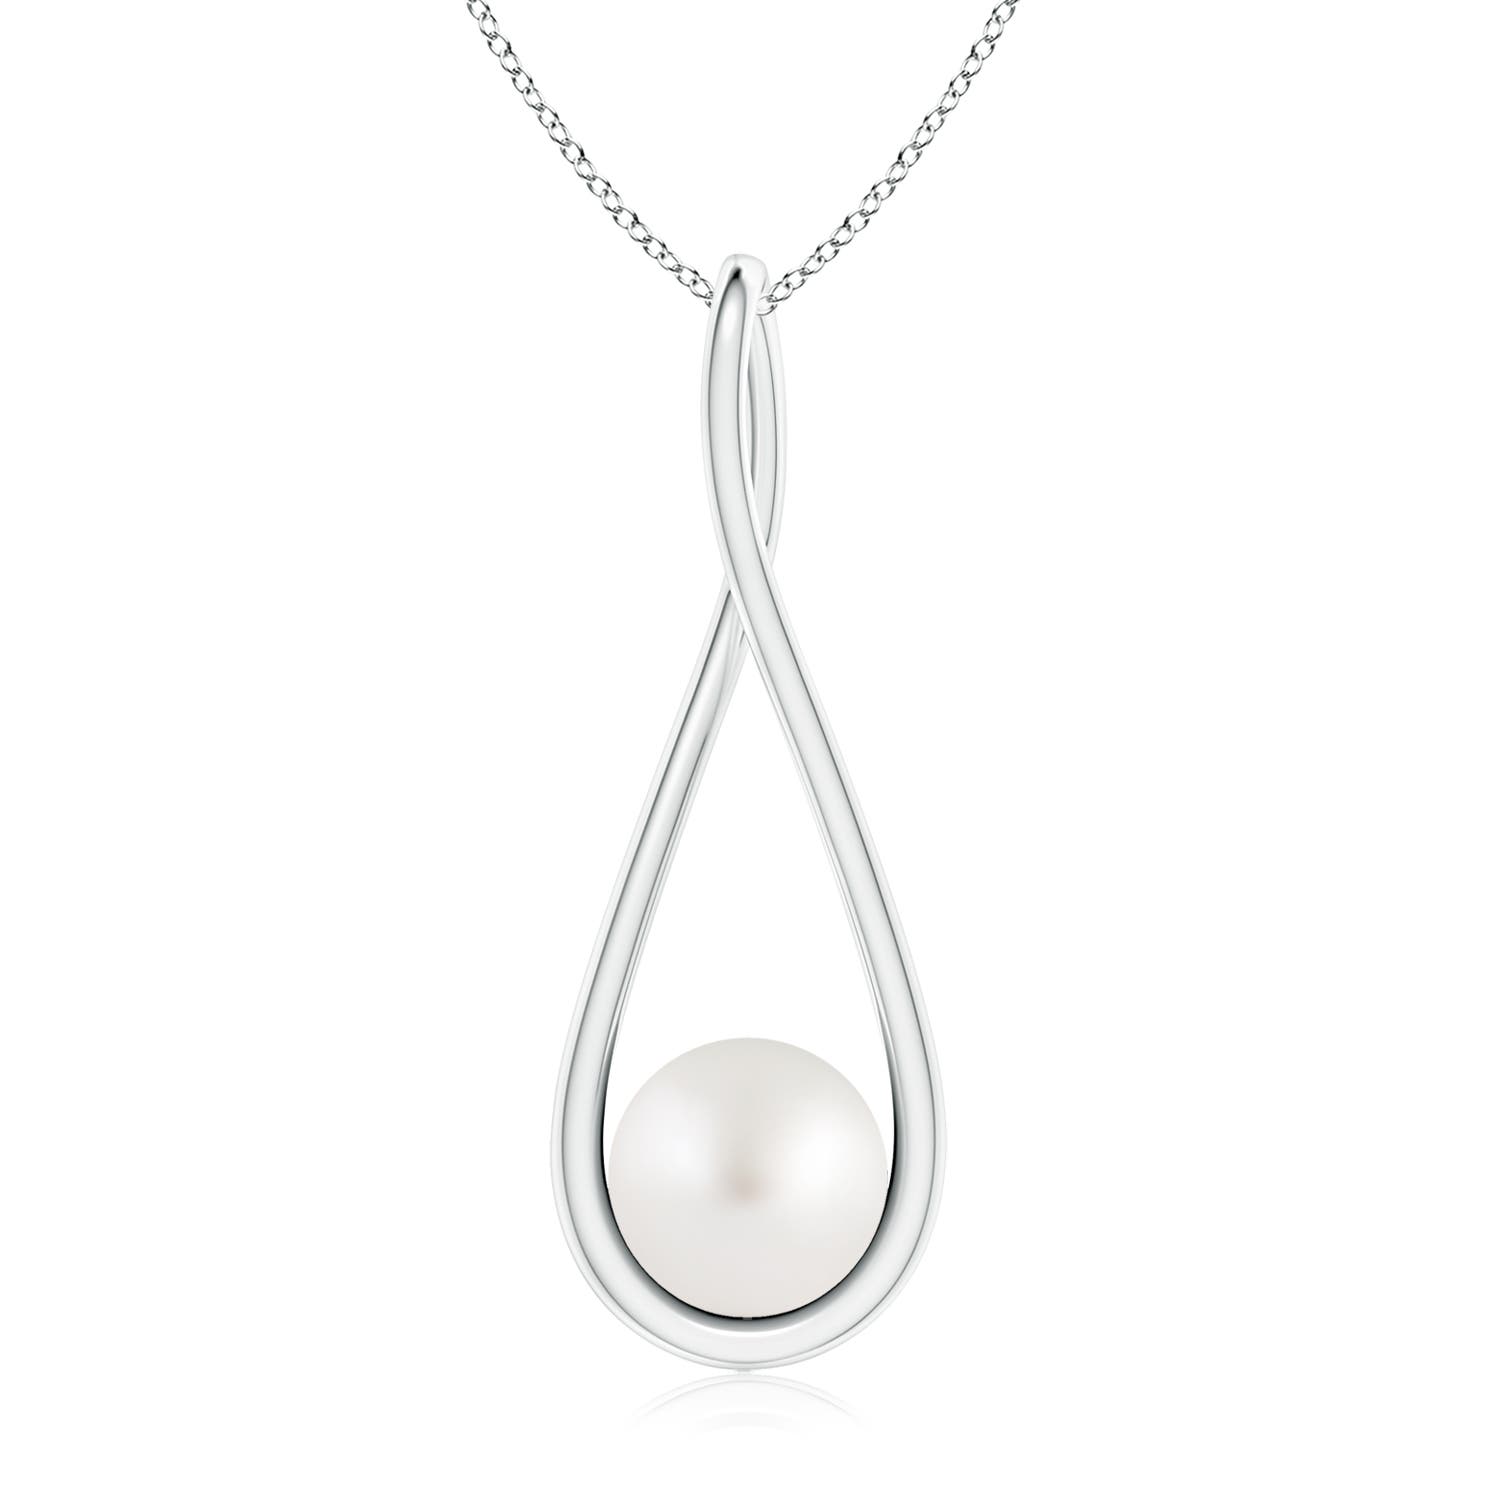 AA - South Sea Cultured Pearl / 3.7 CT / 14 KT White Gold